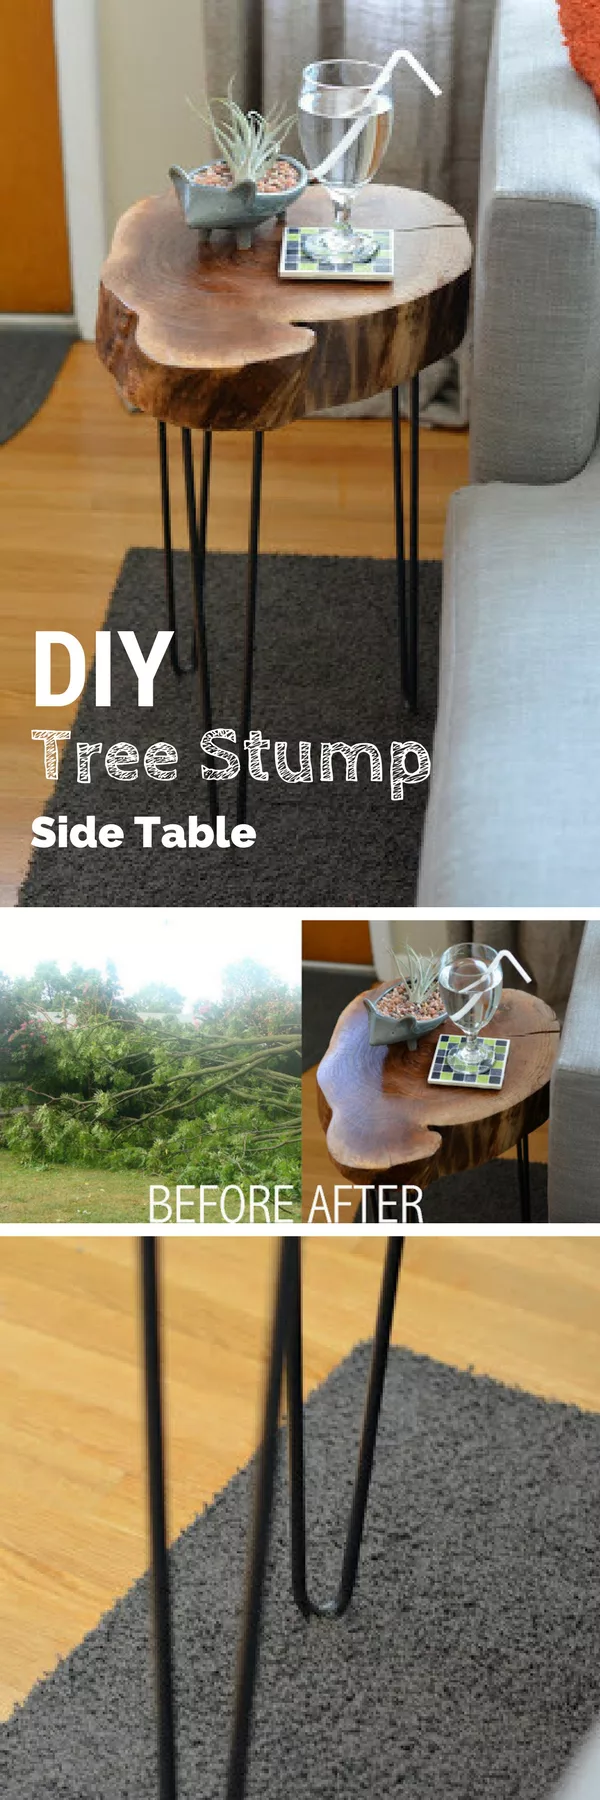 18 Easy DIY Sofa Side Tables You Can Build on a Budget - Check out the tutorial on how to build a DIY tree stump side table